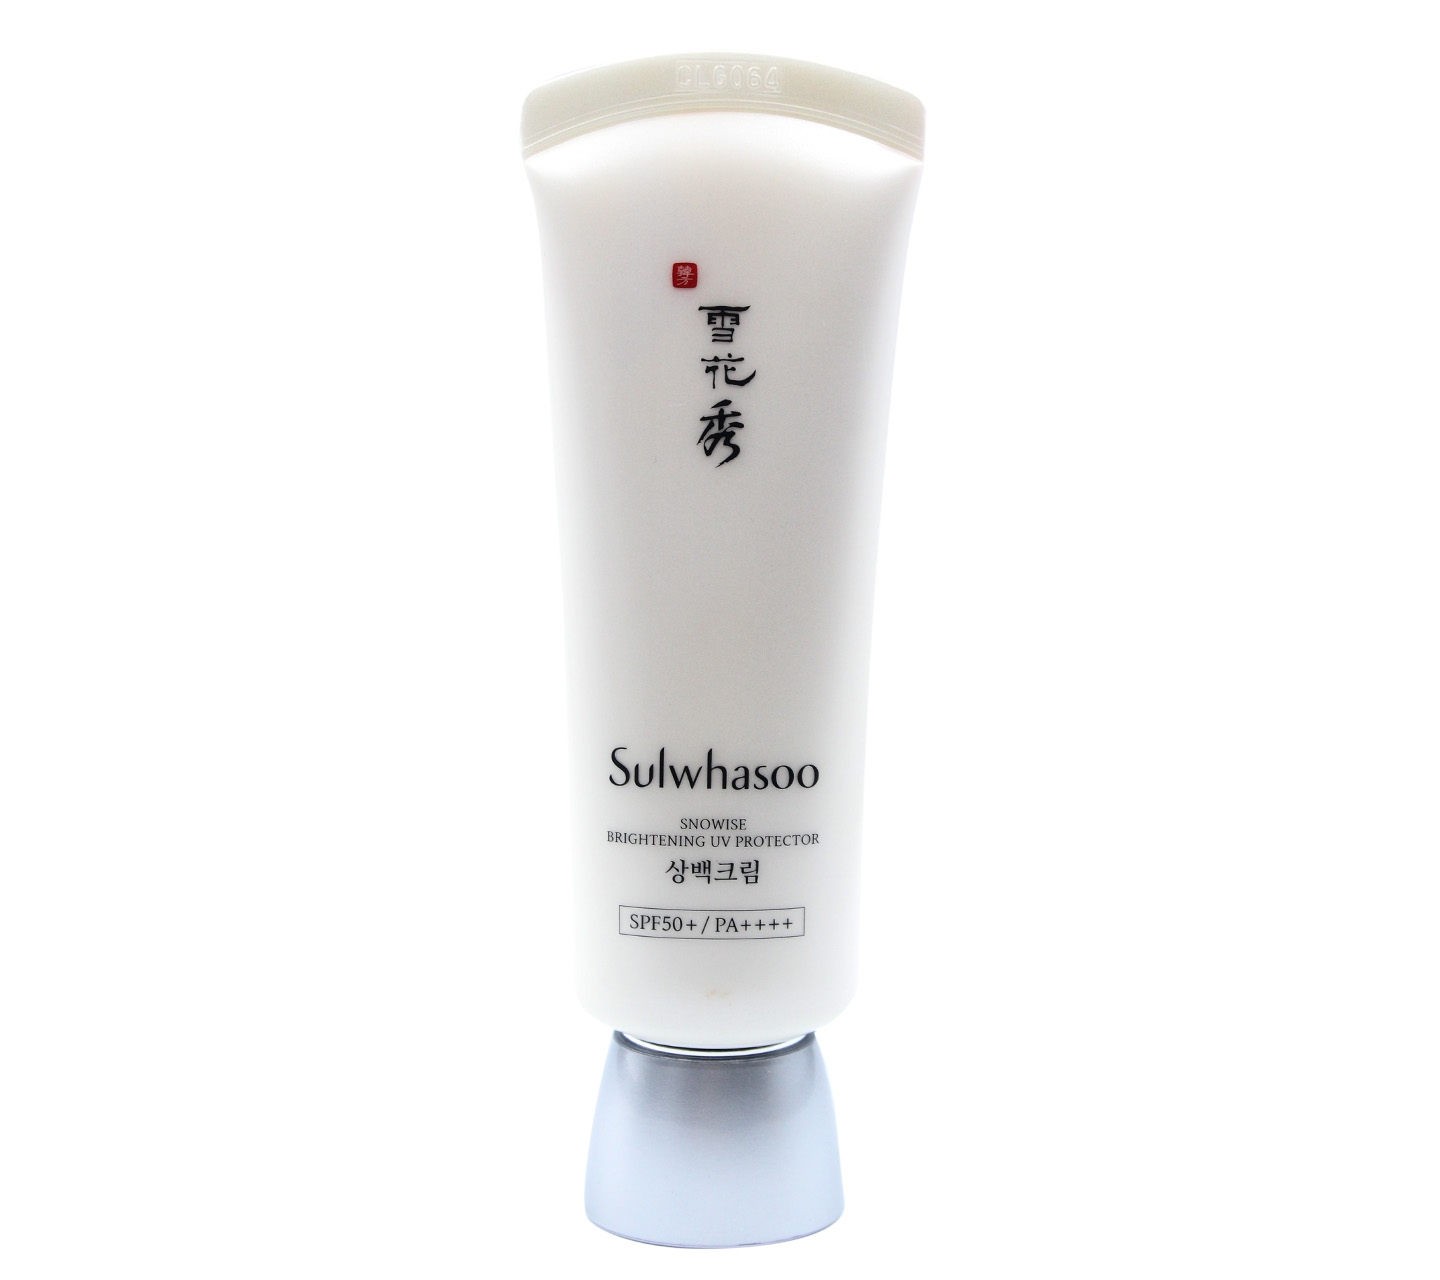 Sulwhasoo Snowise Brightening UV Protector SPF50+ PA++++ No.2 Soft Peach Faces